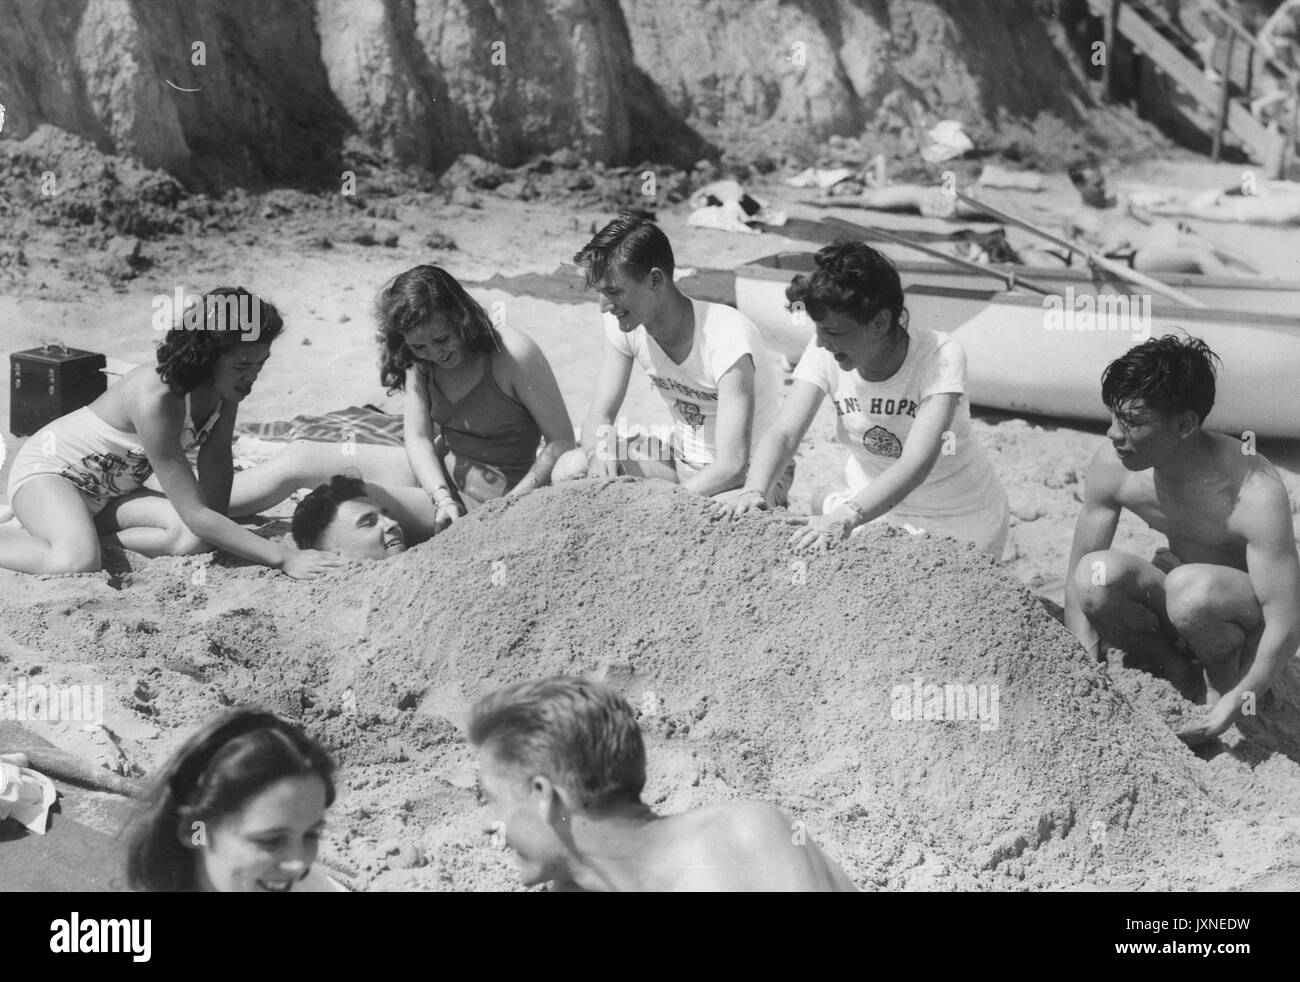 Student Life, Beach Party, Senior Week Candid shot of students and their girlfriends burying a student in the sand at Triton beach, 1947. Stock Photo